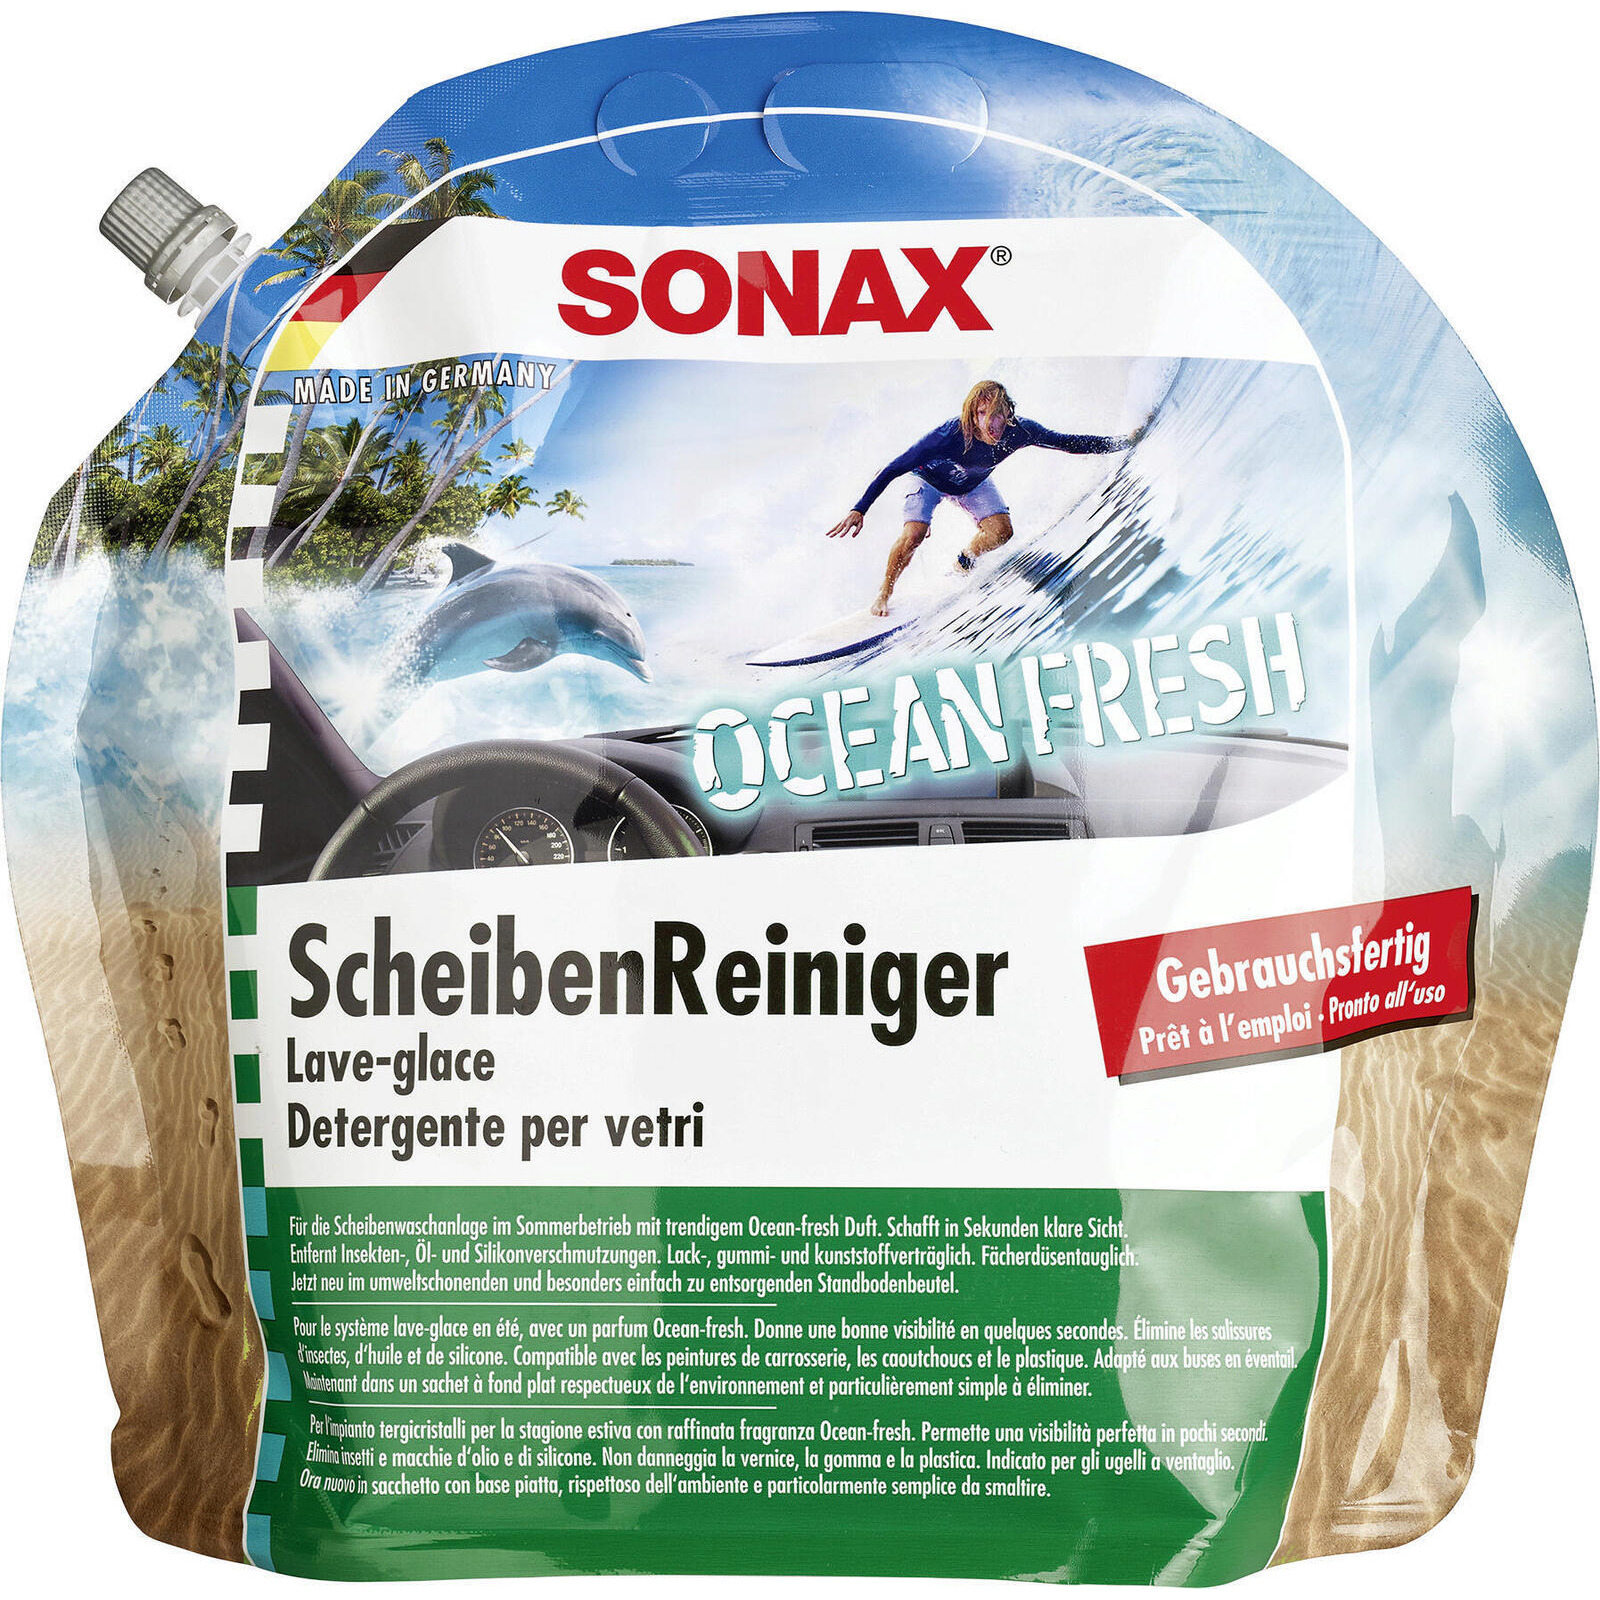 SONAX Cleaner, window cleaning system Windscreen Wash ready-to-use Ocean-fresh